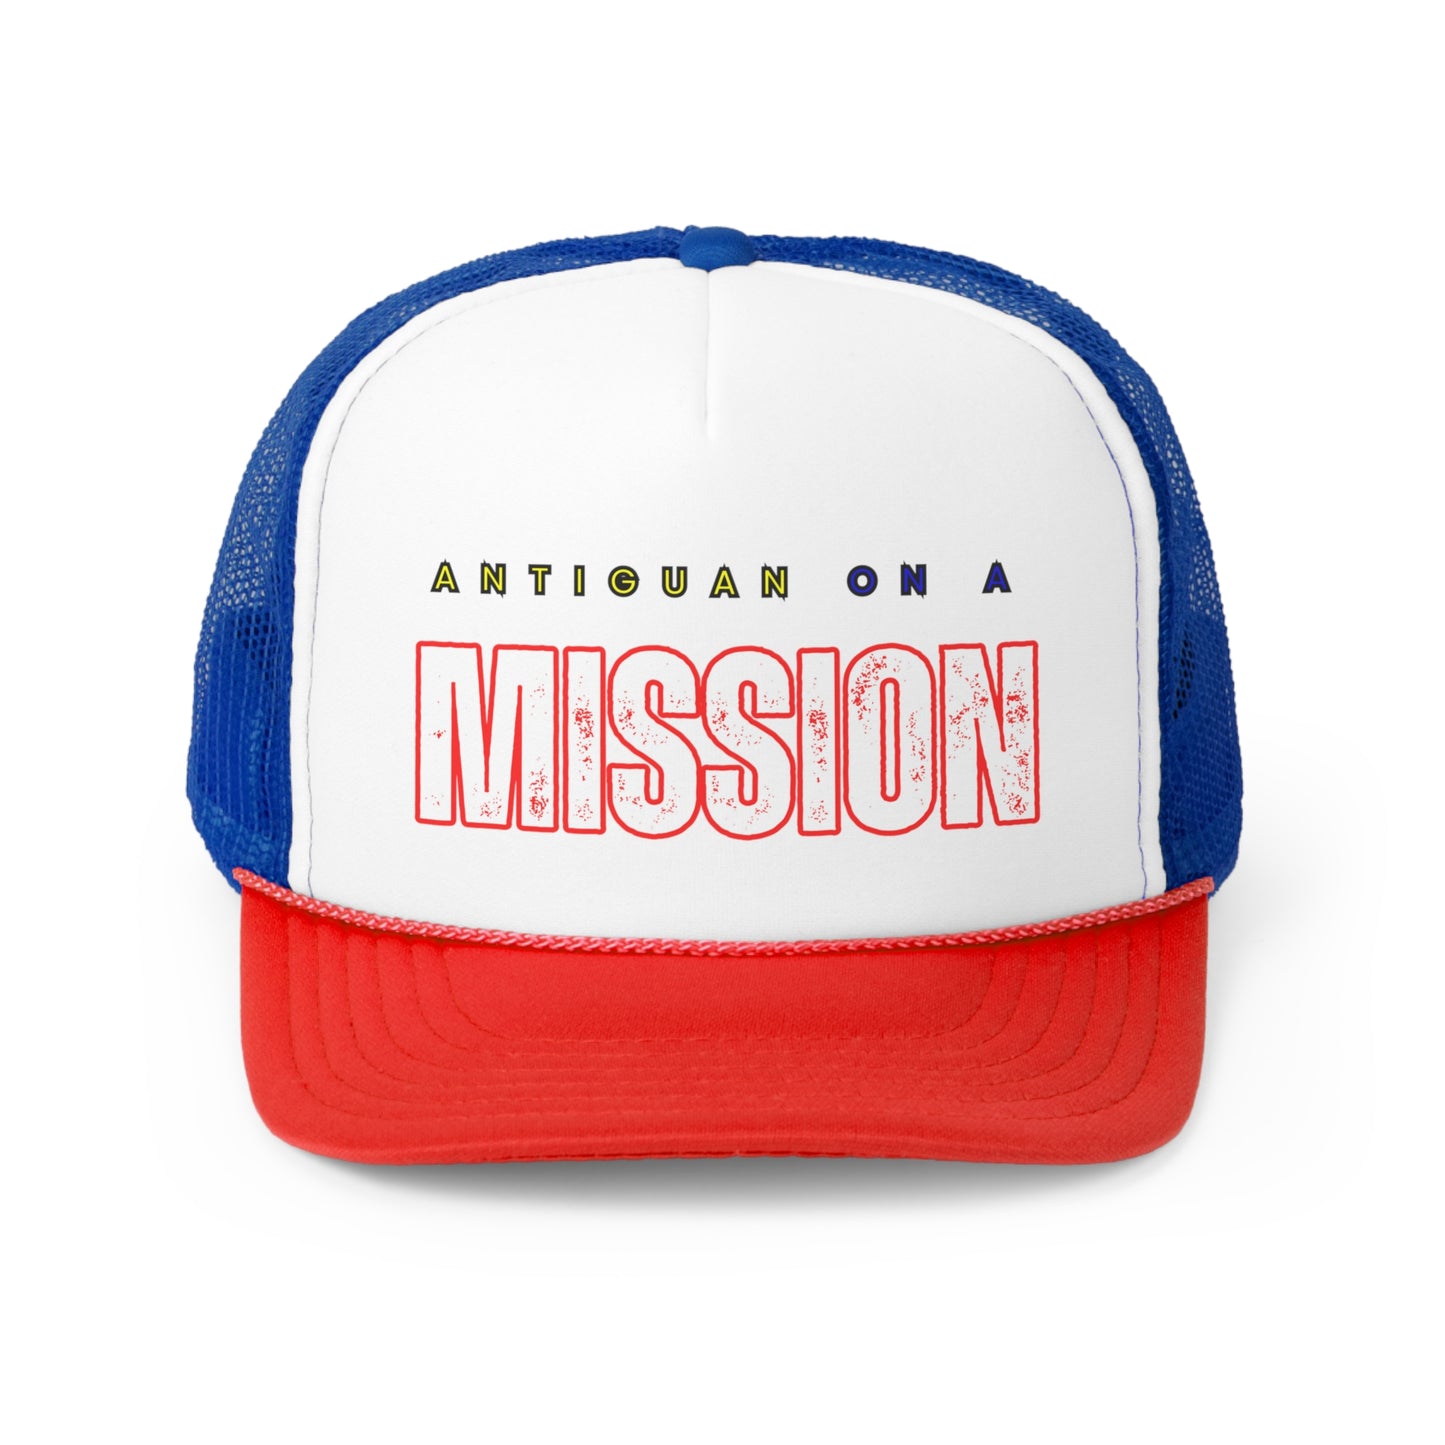 Antiguan on a Mission Trucker Caps